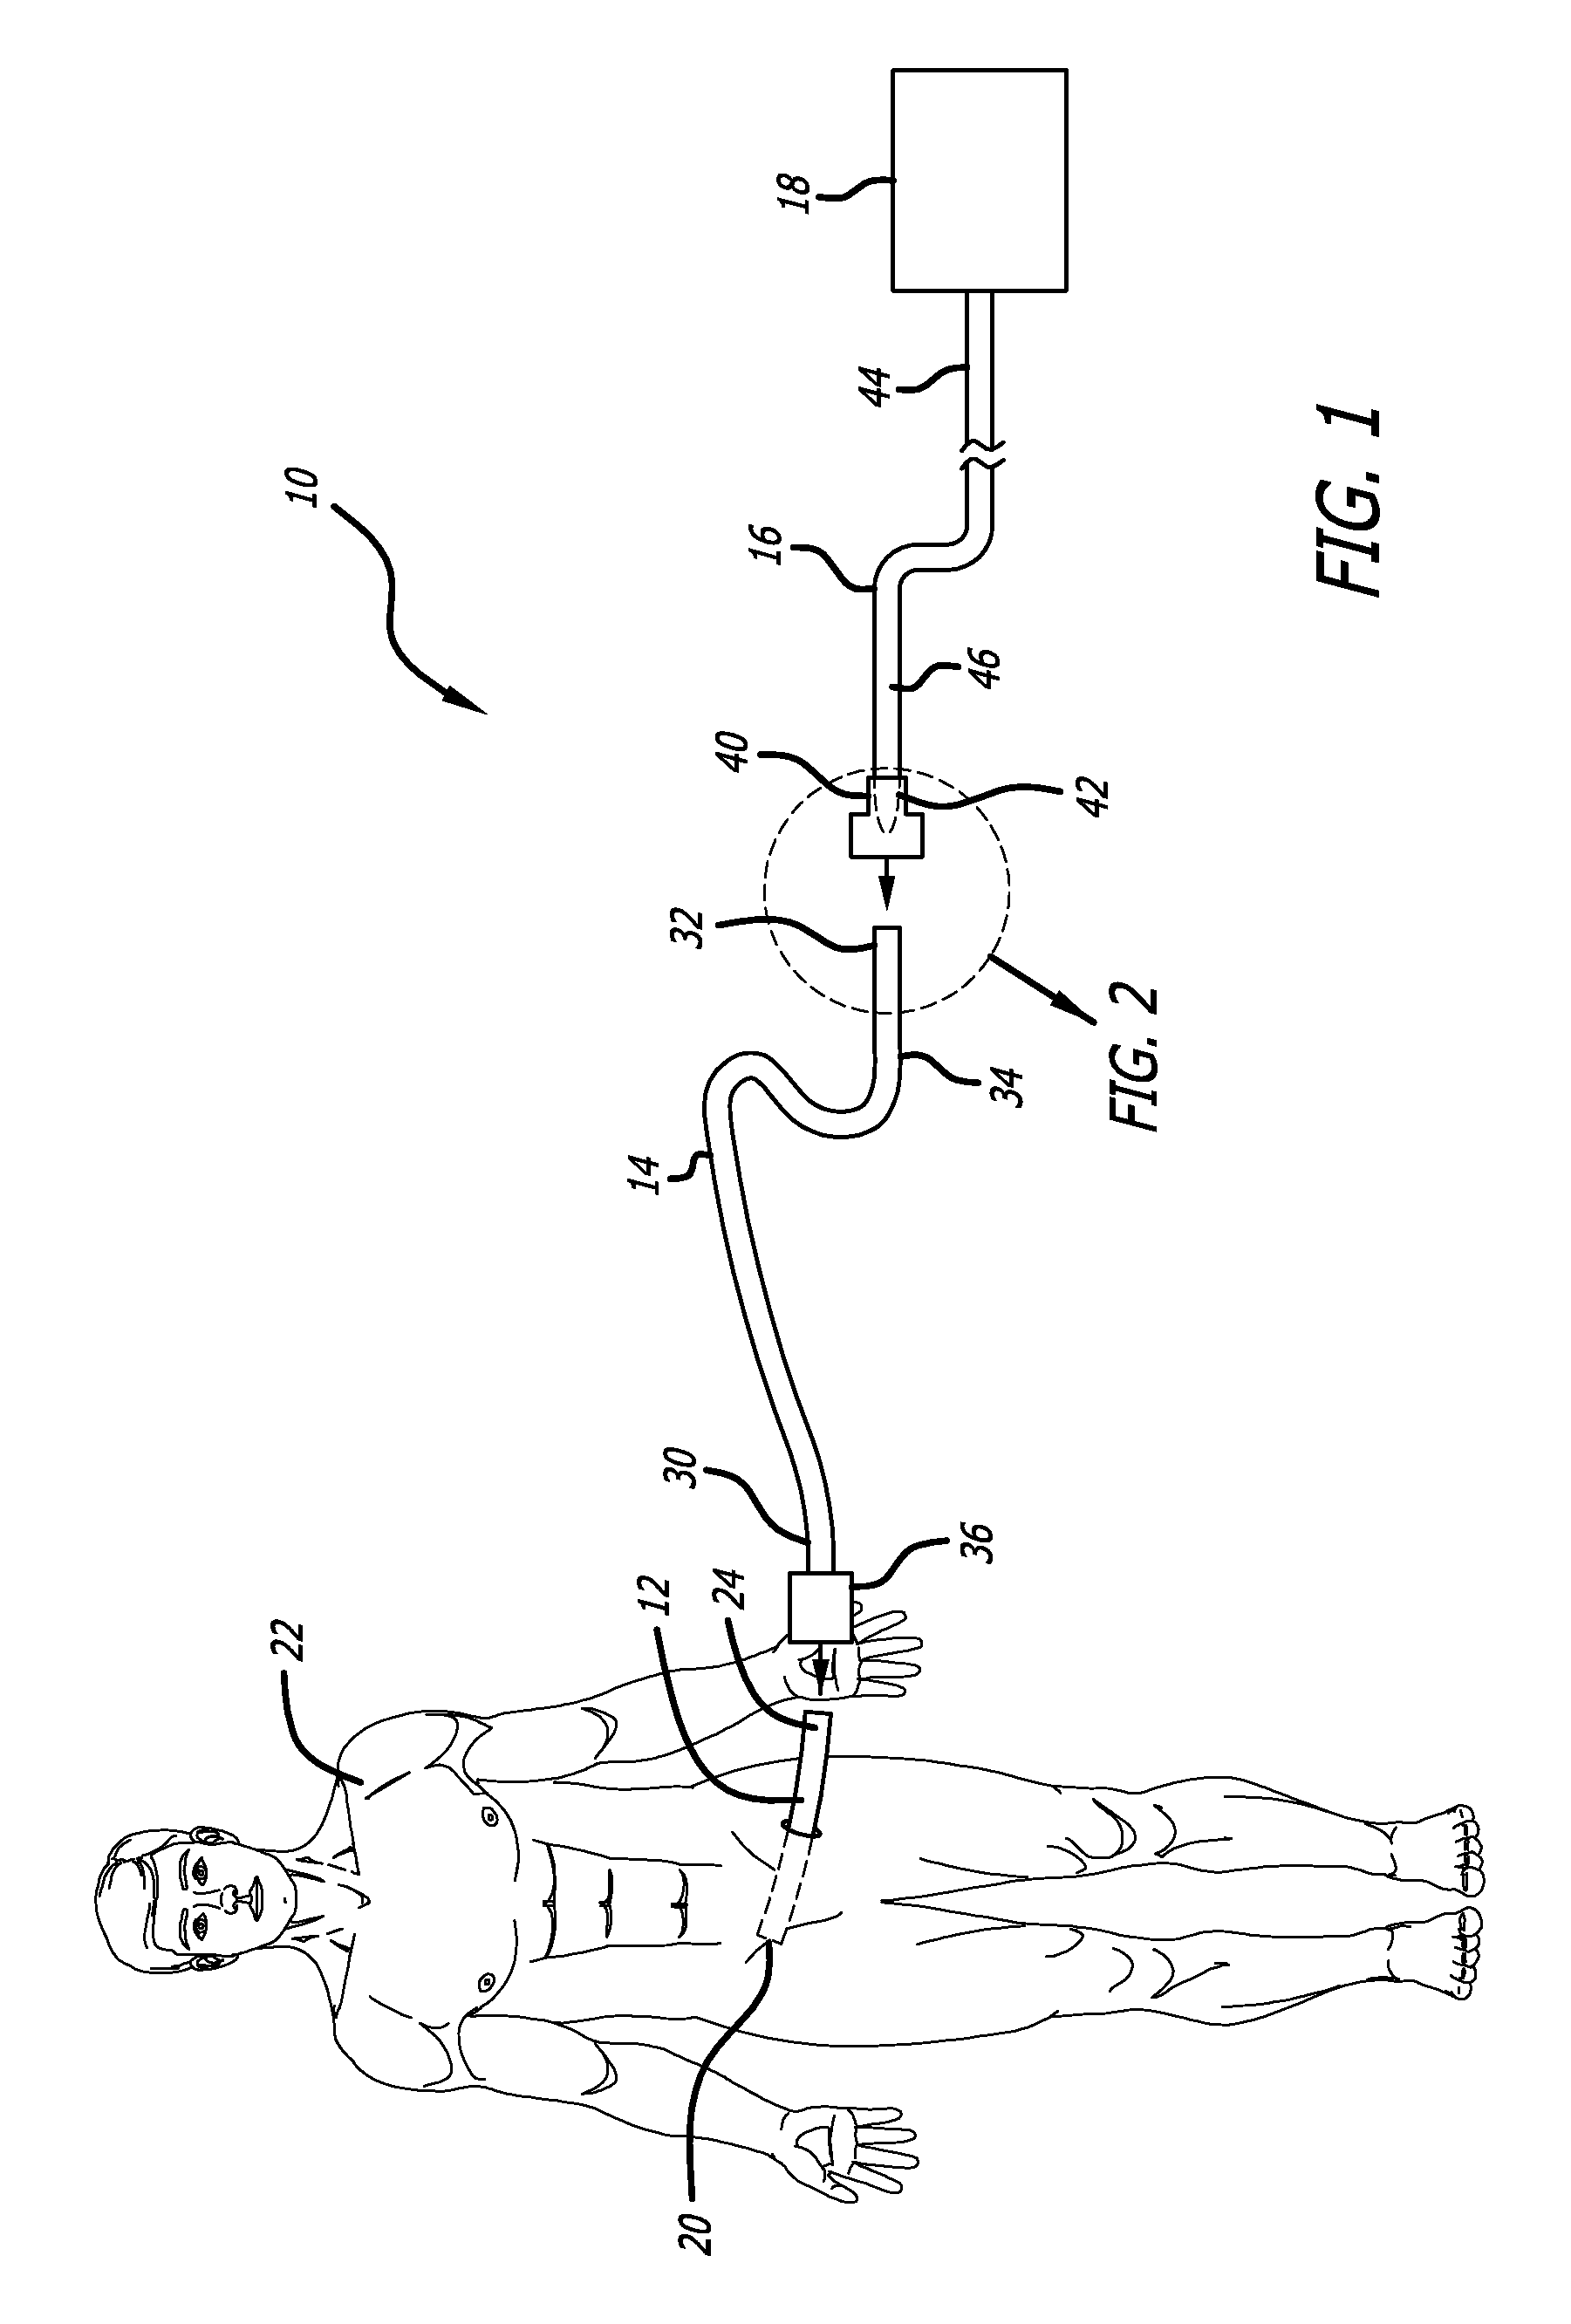 Apparatus for disinfecting or sterilizing a catheter and method of use